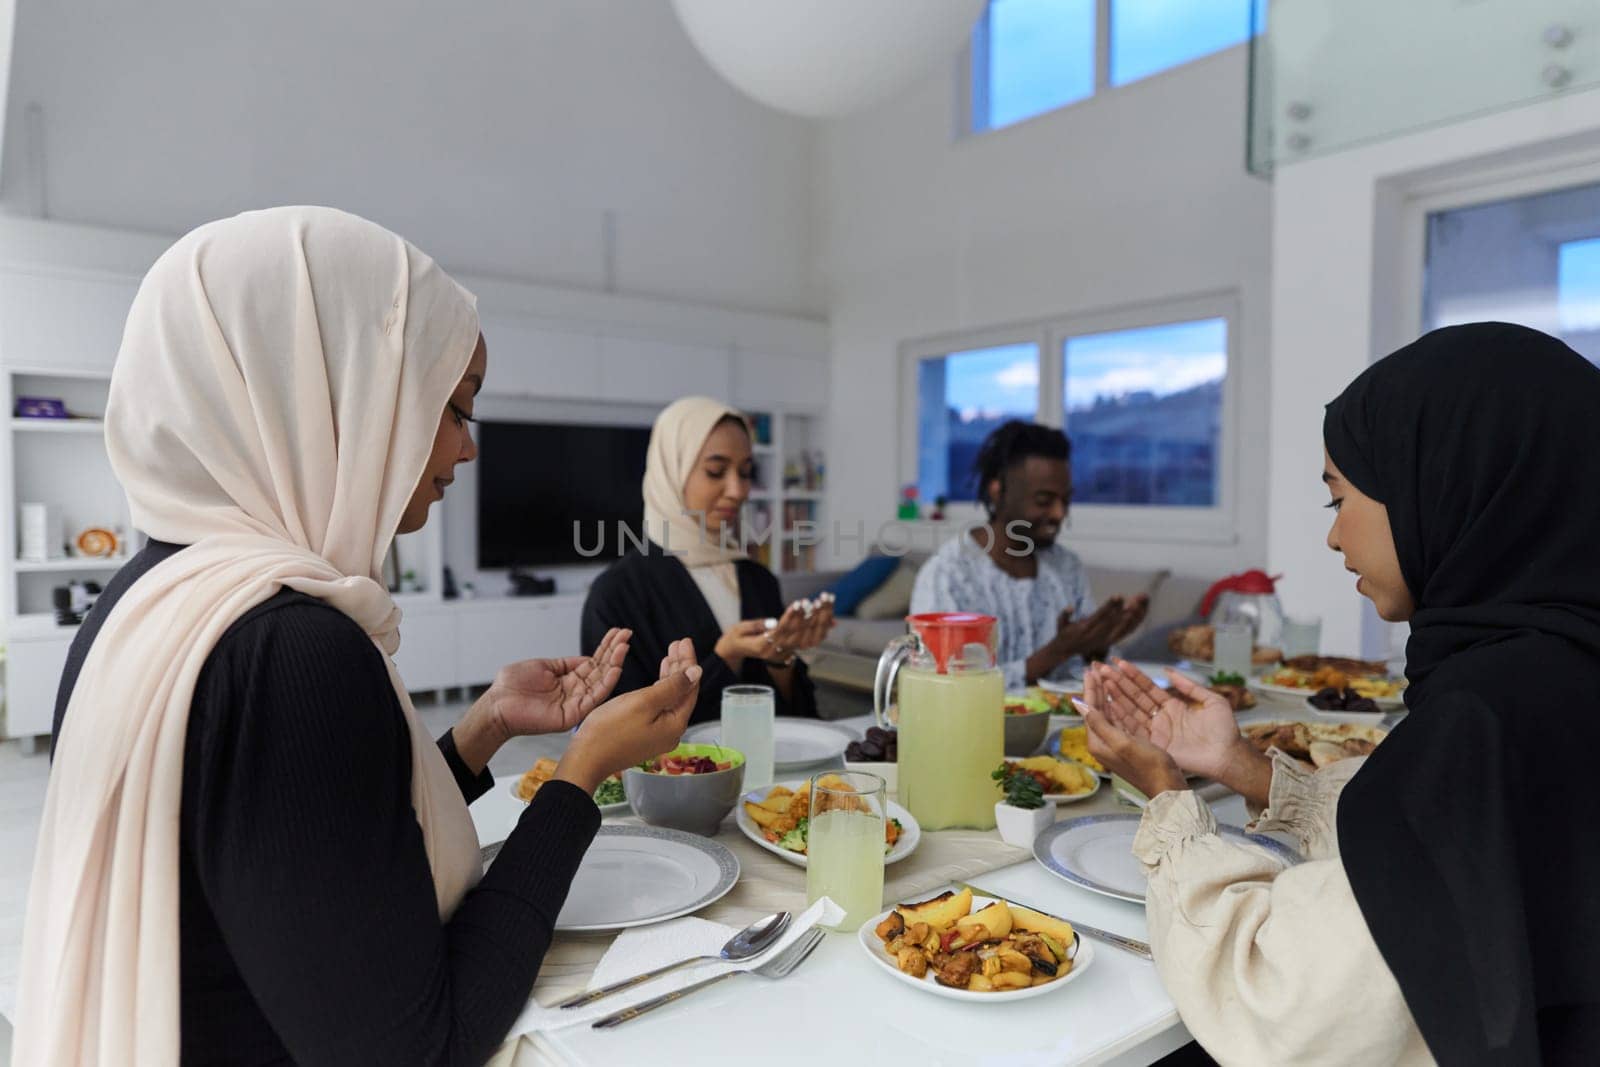 In the sacred month of Ramadan, a diverse Muslim family comes together in spiritual unity, fervently praying to God before breaking their fast, capturing a moment of collective devotion, cultural diversity, and familial joy in the midst of the holy celebration by dotshock